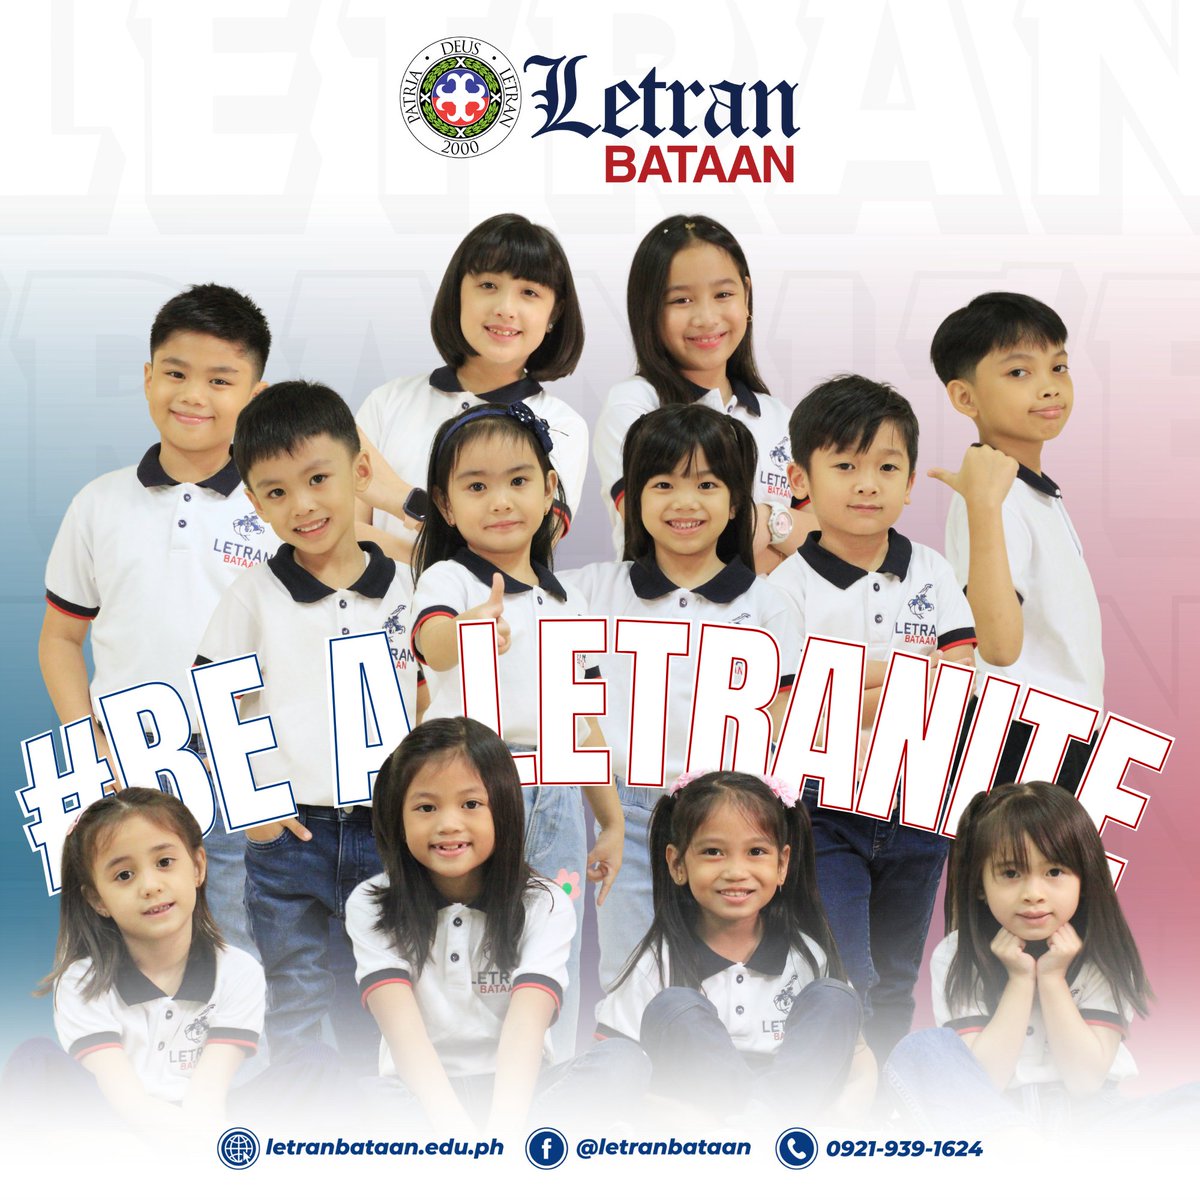 It's time to take an exciting step towards a bright academic future for your little ones! Admissions for Pre-Kinder, Kinder, and Grade School programs are ongoing! Admissions Procedures and Requirements: letranbataan.edu.ph/Home/Admission Walk-in applicants are welcome. #BeALetranite